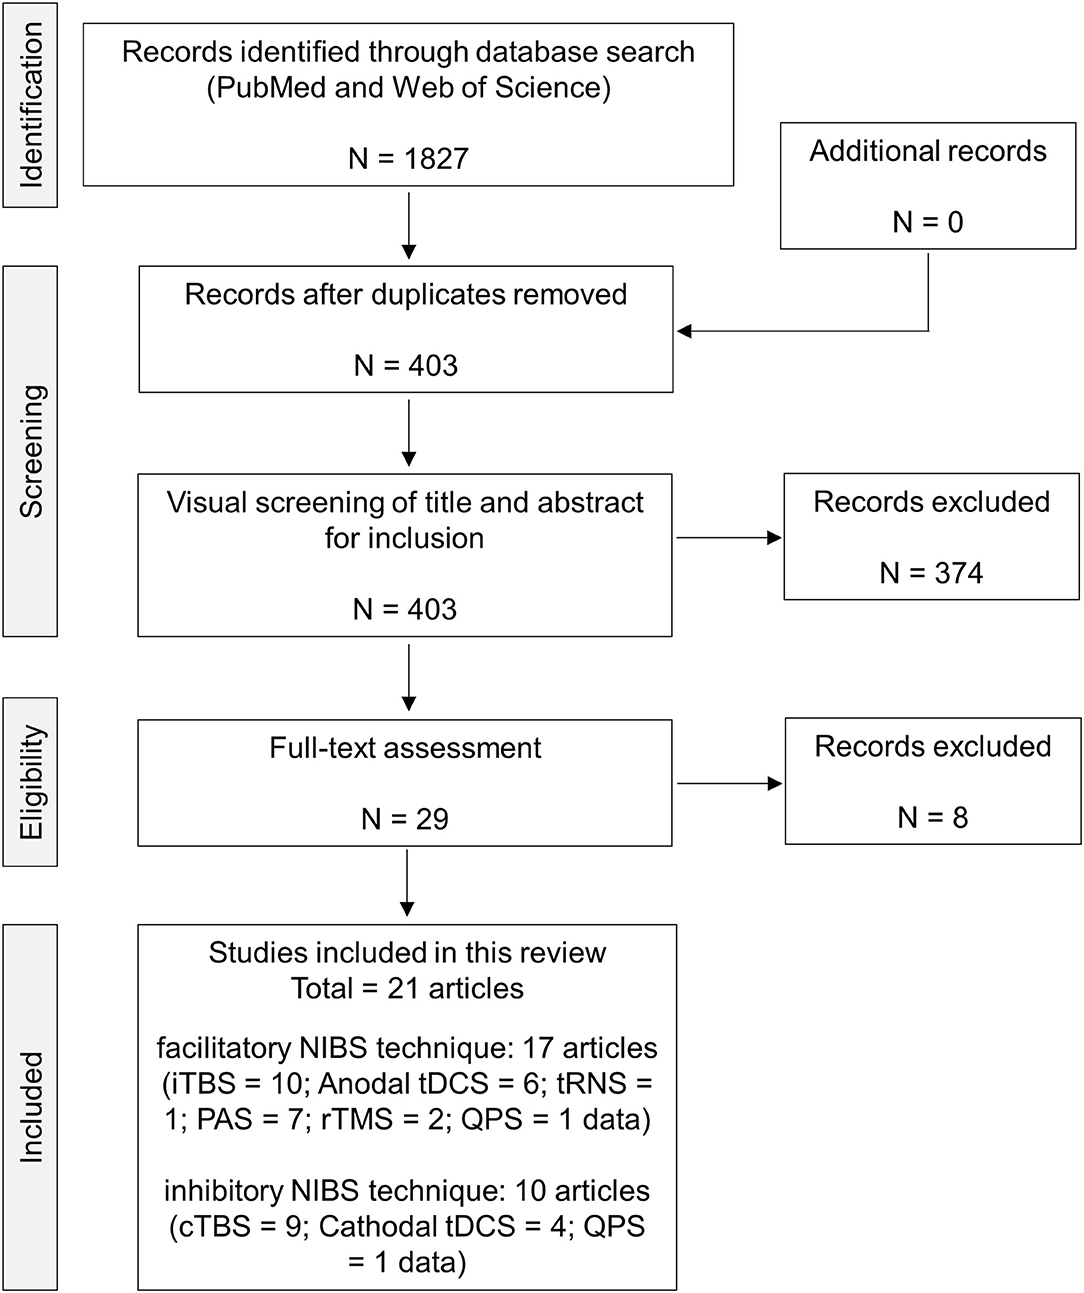 Frontiers | Do Brain-Derived Neurotrophic Factor Genetic Polymorphisms Modulate the Efficacy of Motor Cortex Plasticity Induced Non-invasive Brain Stimulation? A Systematic Review | Human Neuroscience